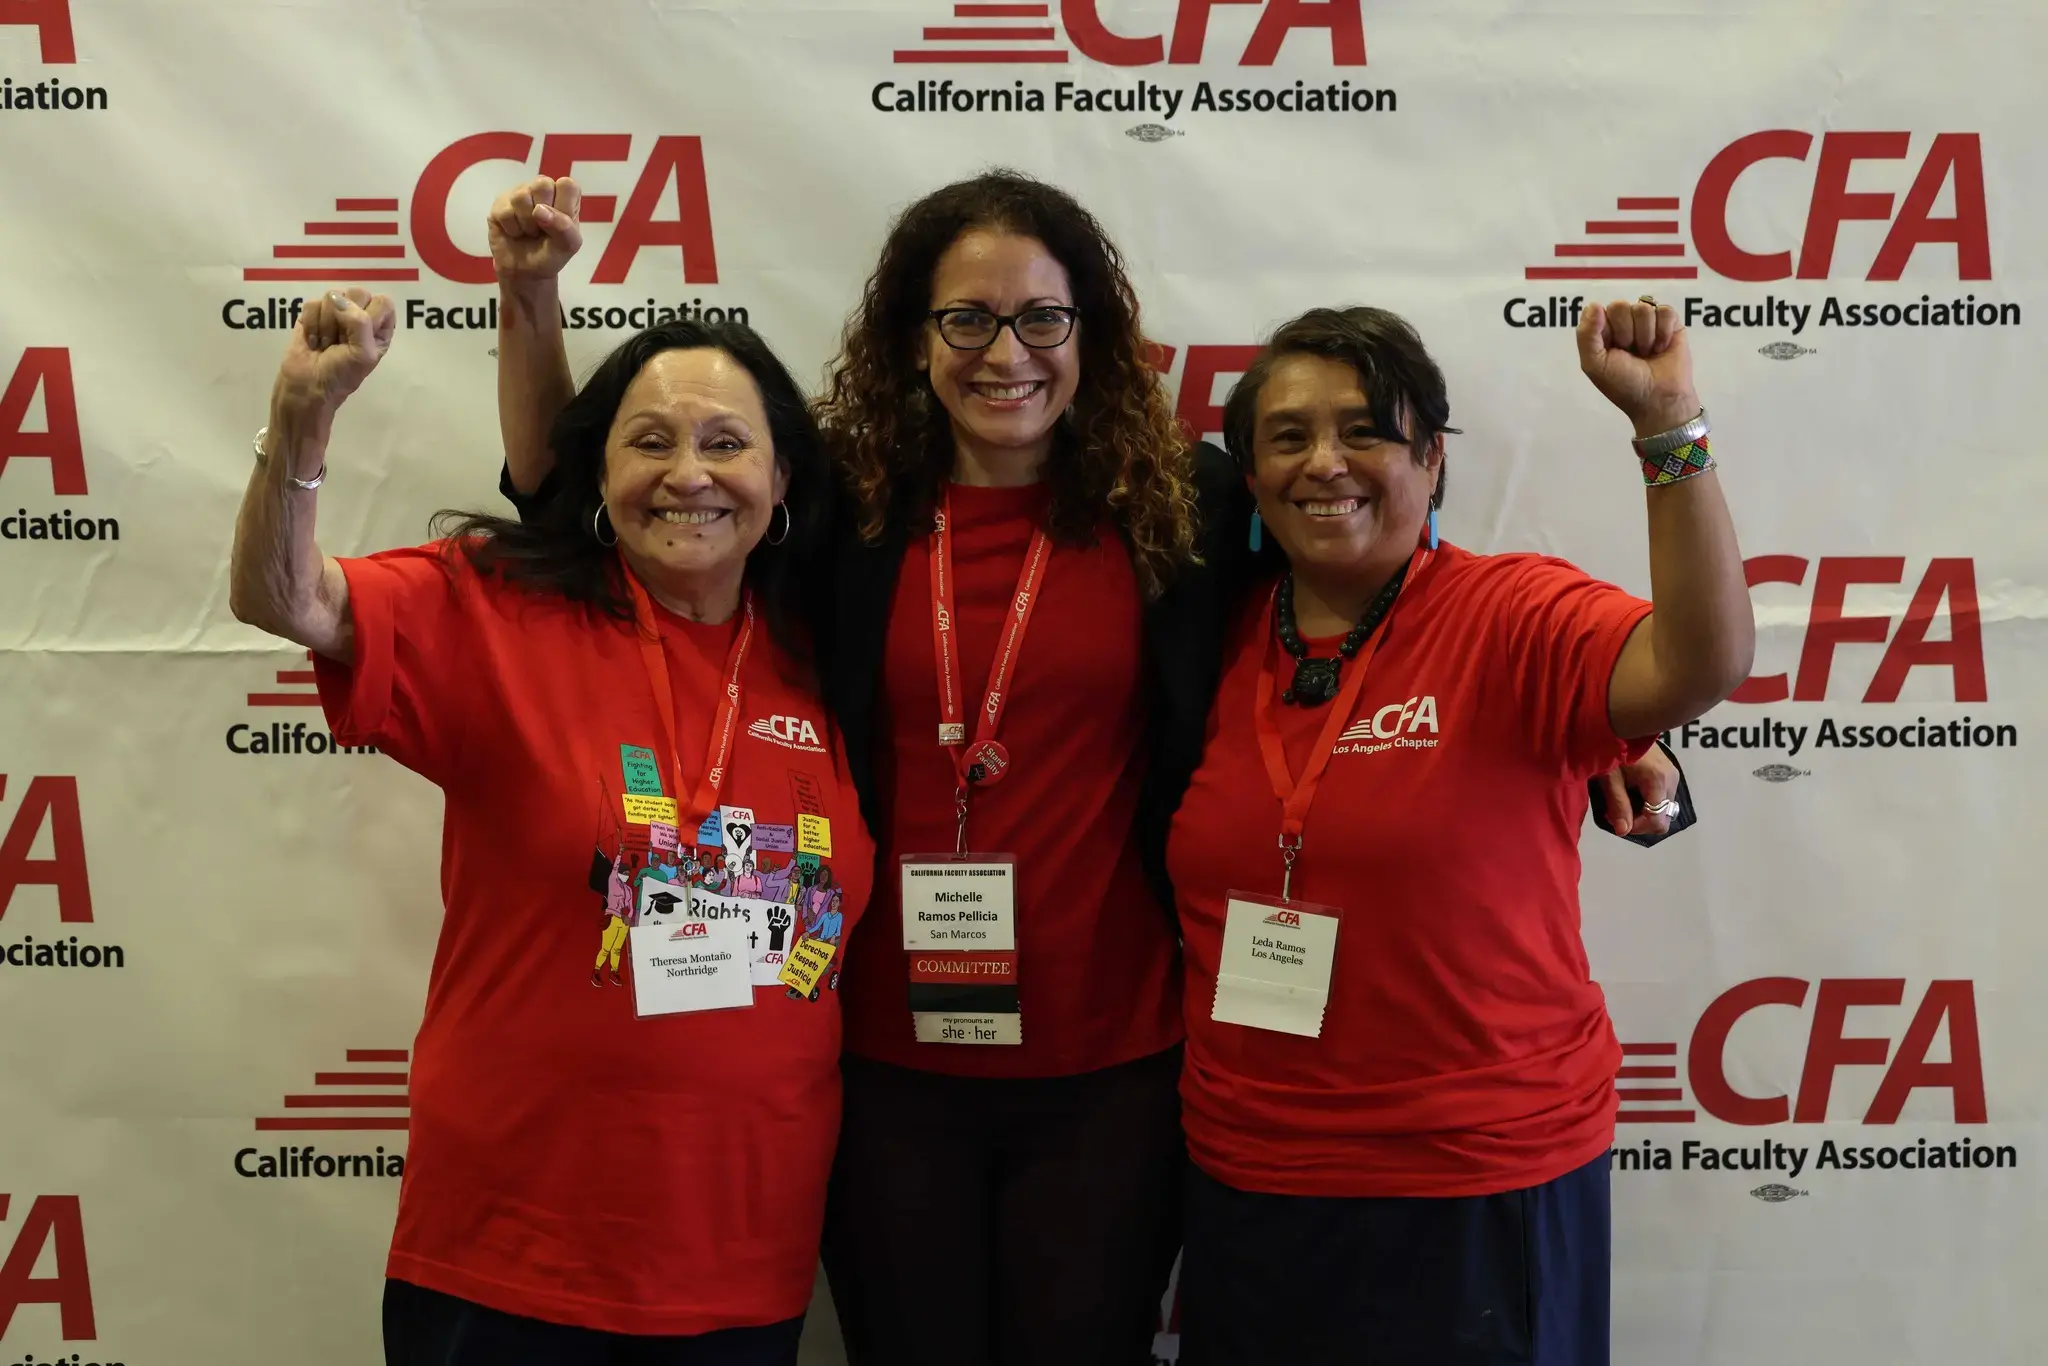 A group of women in red shirts pose for a photo infront of CFA banner.